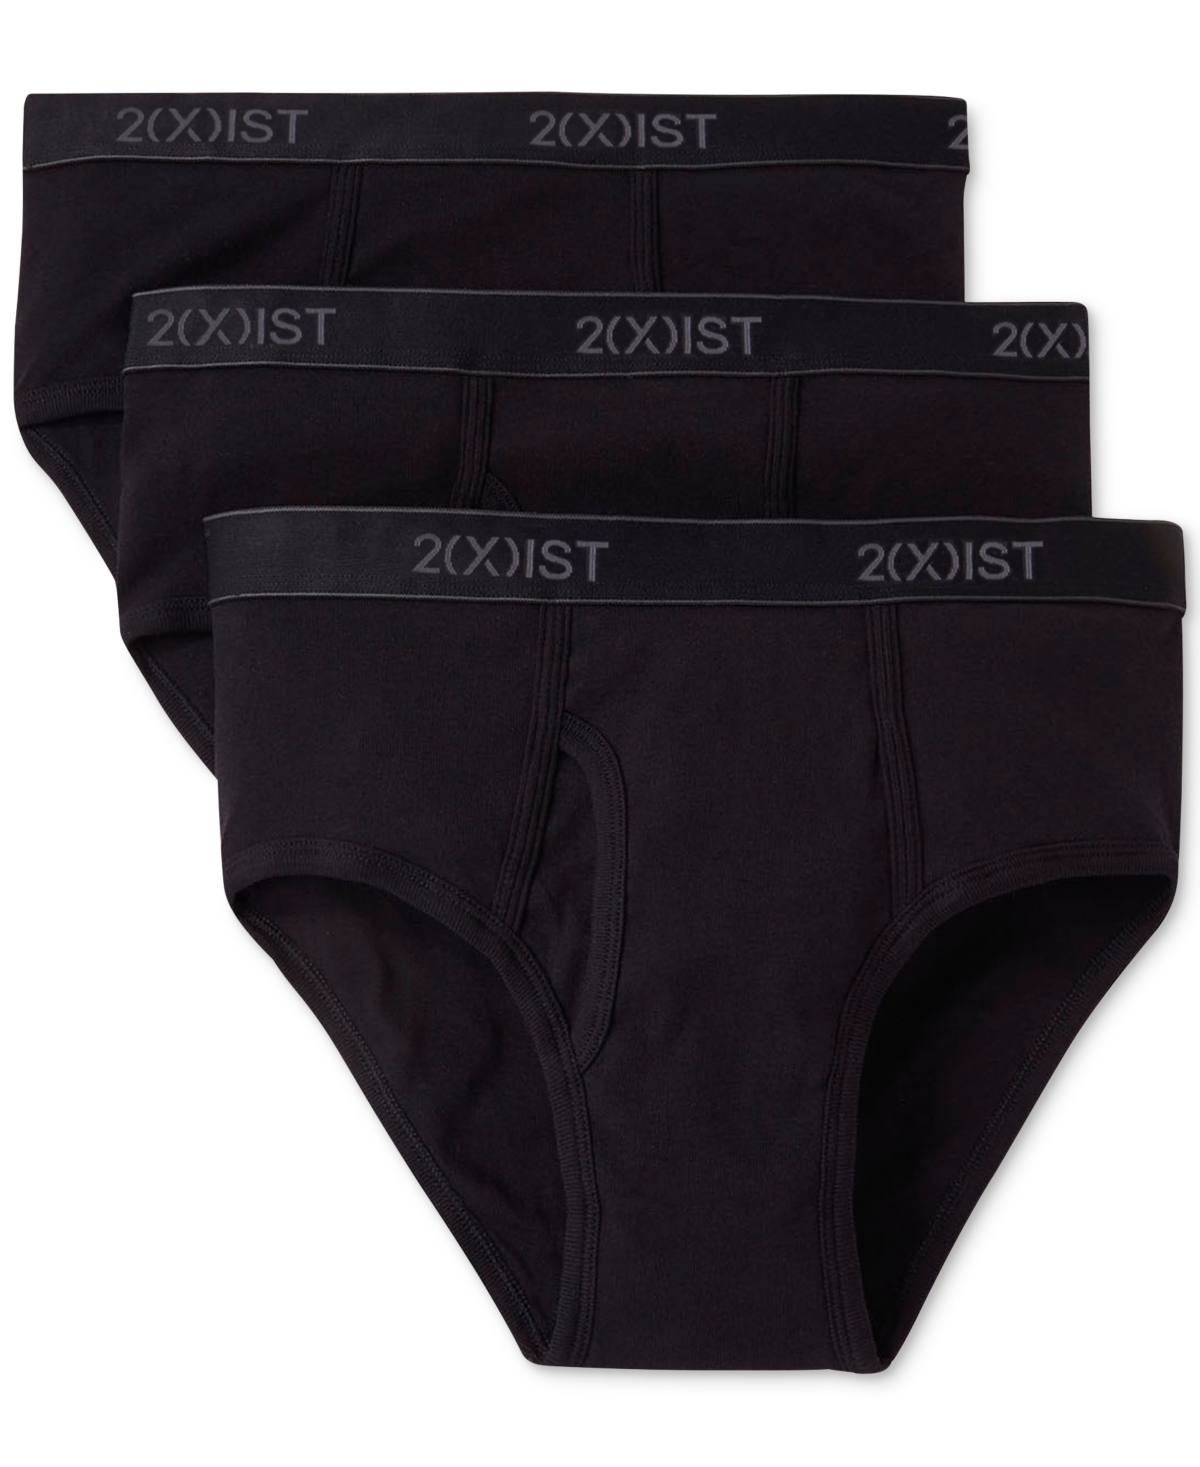 2(x)ist Fly Front Men's Cotton Briefs, 3-Pack - Black New